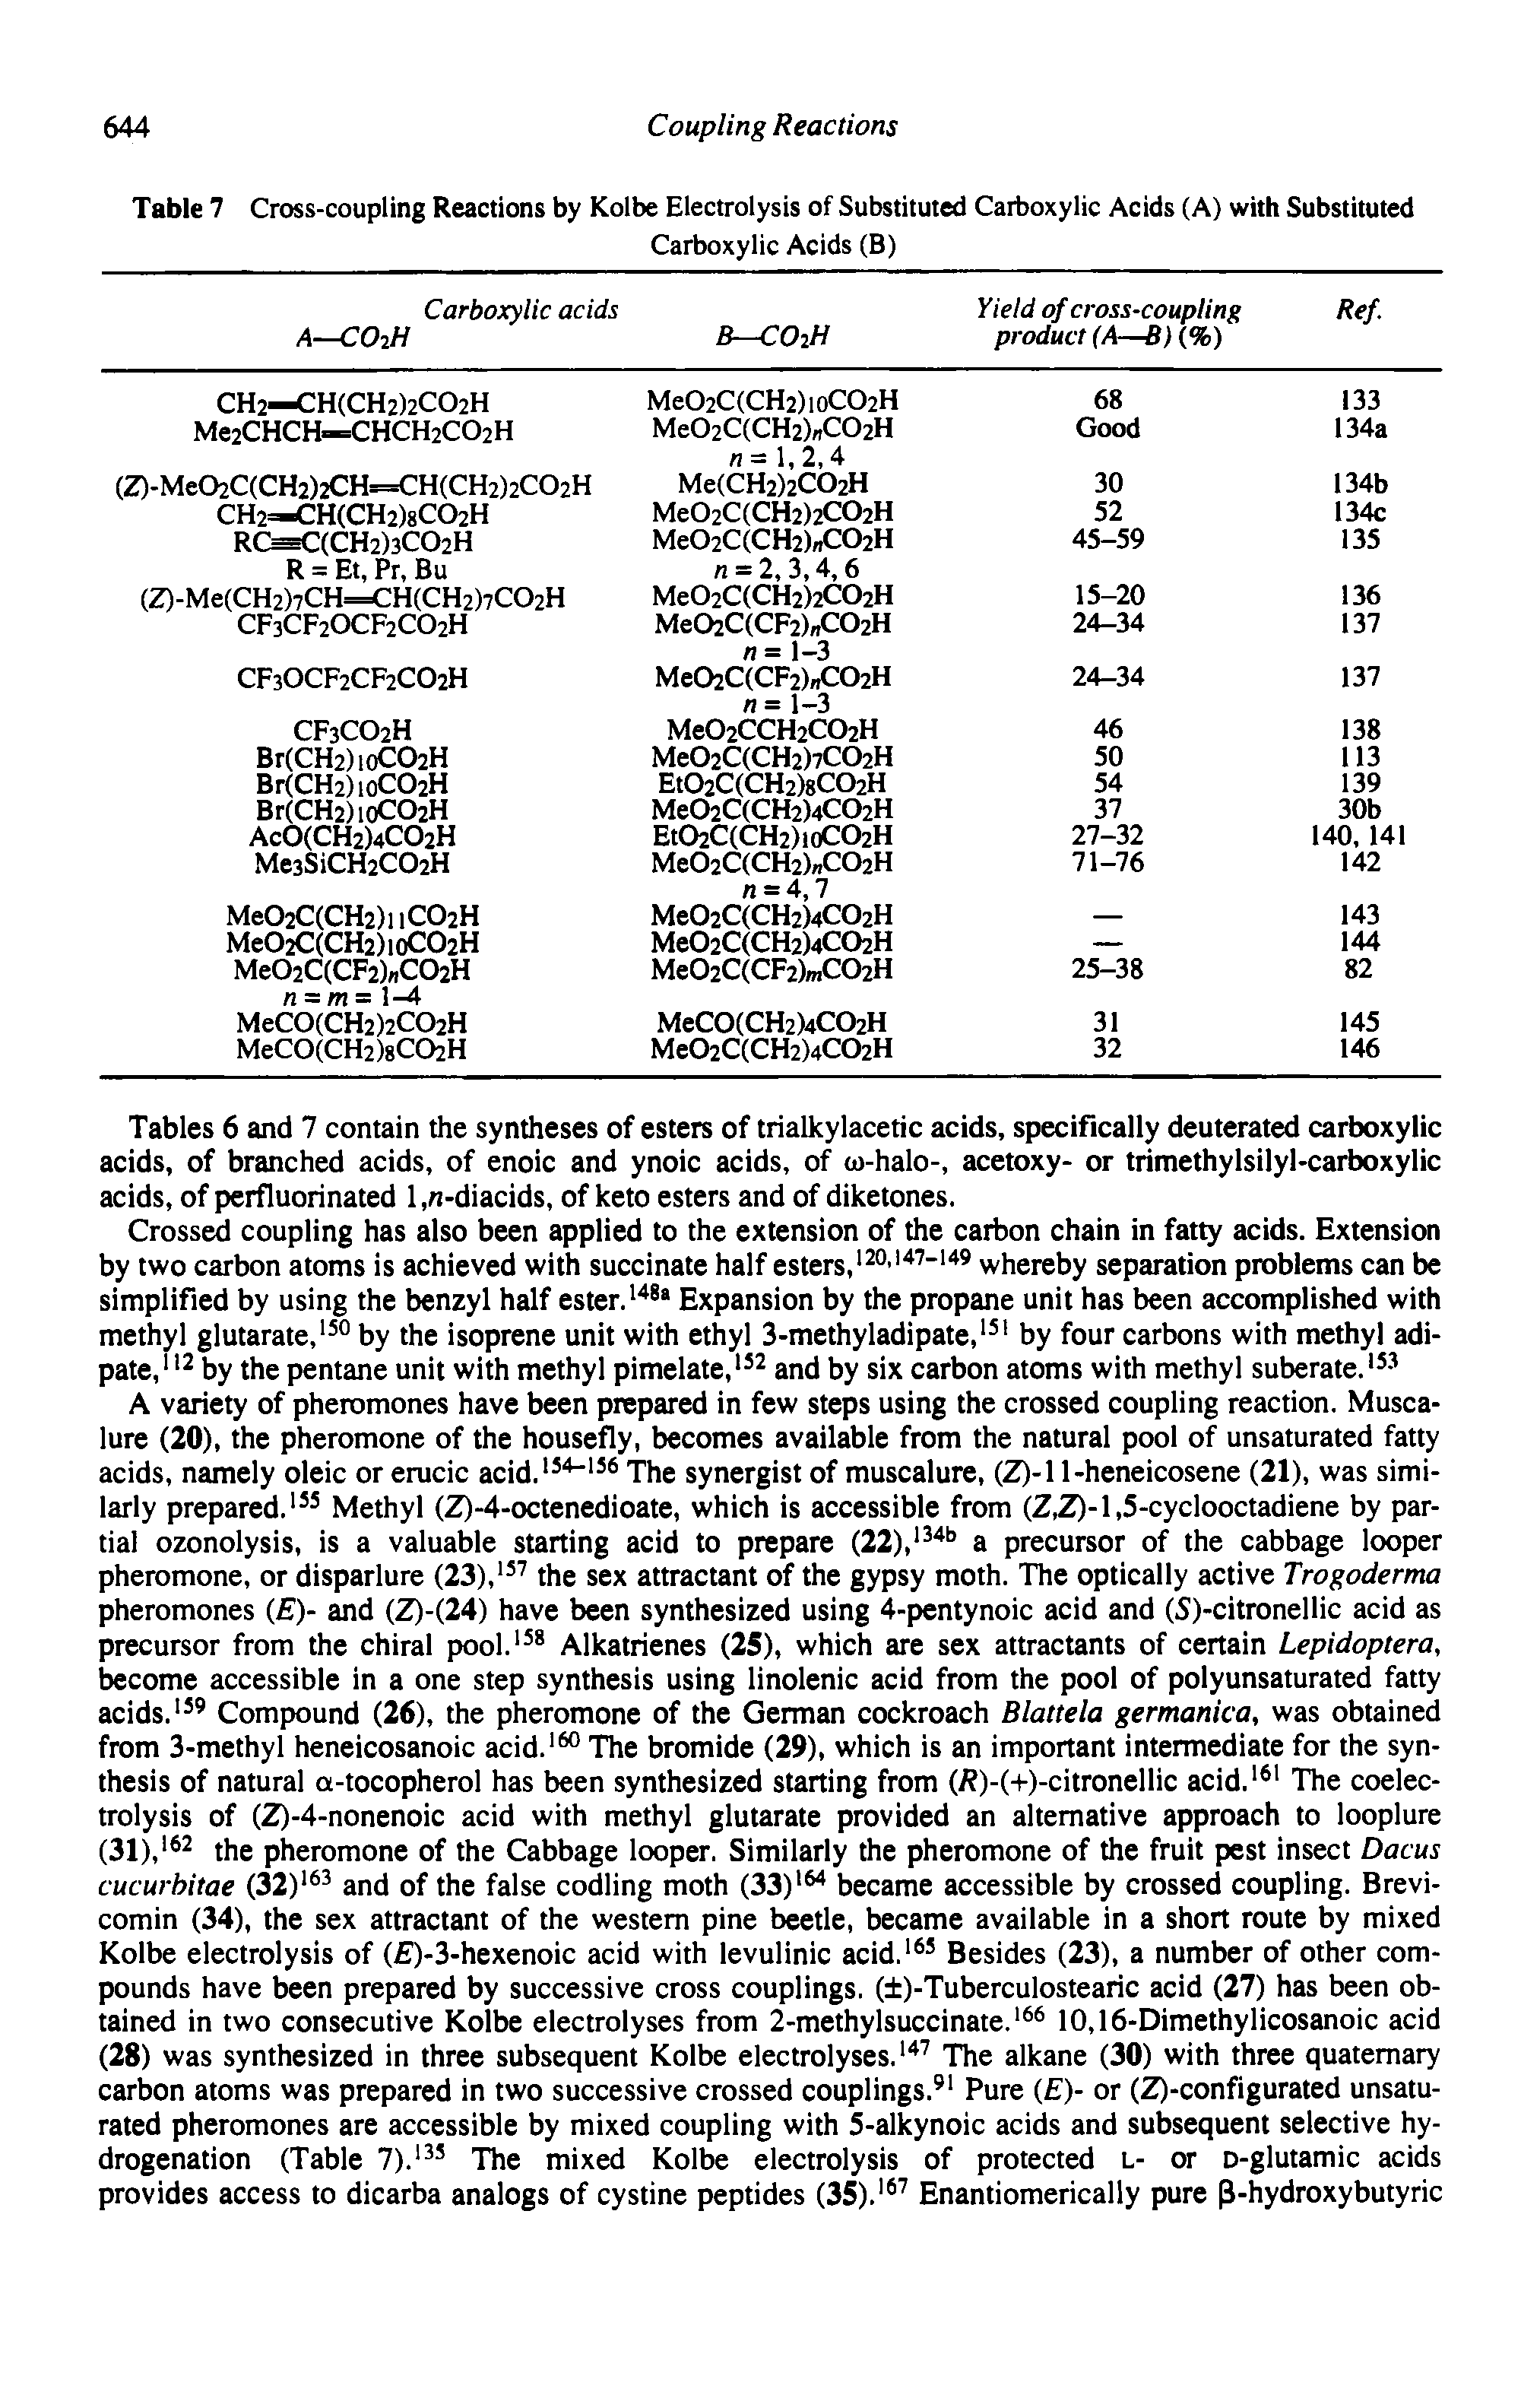 Tables 6 and 7 contain the syntheses of esters of trialkylacetic acids, specifically deuterated carboxylic acids, of branched acids, of enoic and ynoic acids, of w-halo-, acetoxy- or trimethylsilyl-carboxylic acids, of perfluorinated 1, n-diacids, of keto esters and of diketones.